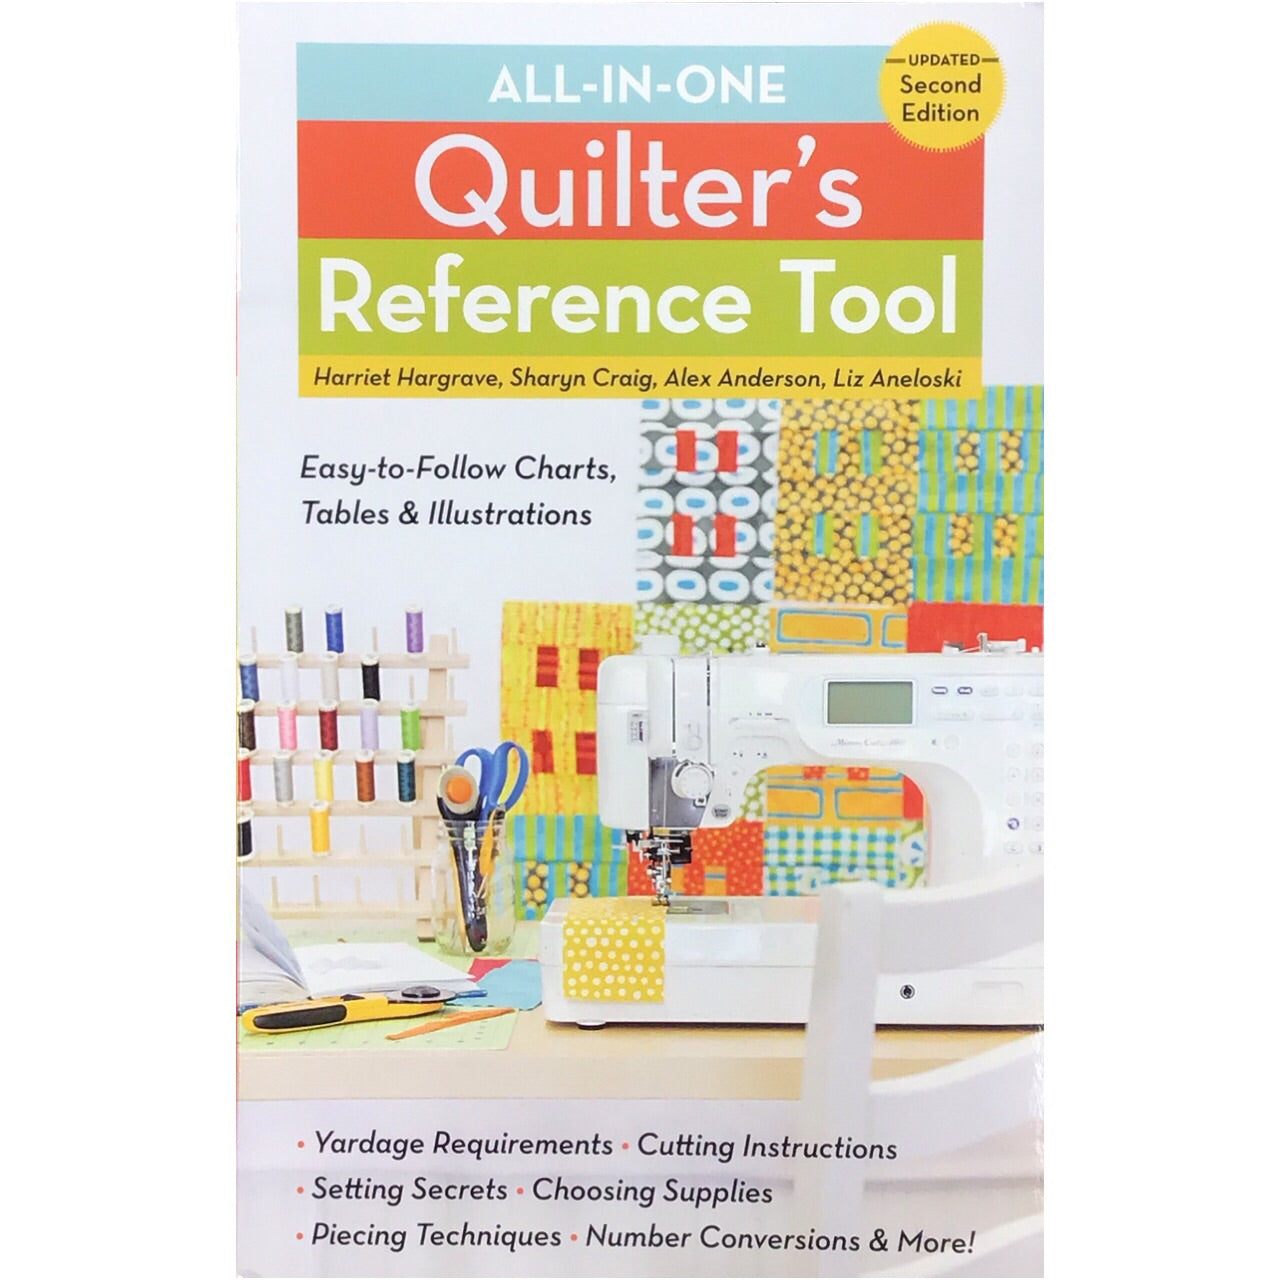 All-in-One Quilter's Reference Tool